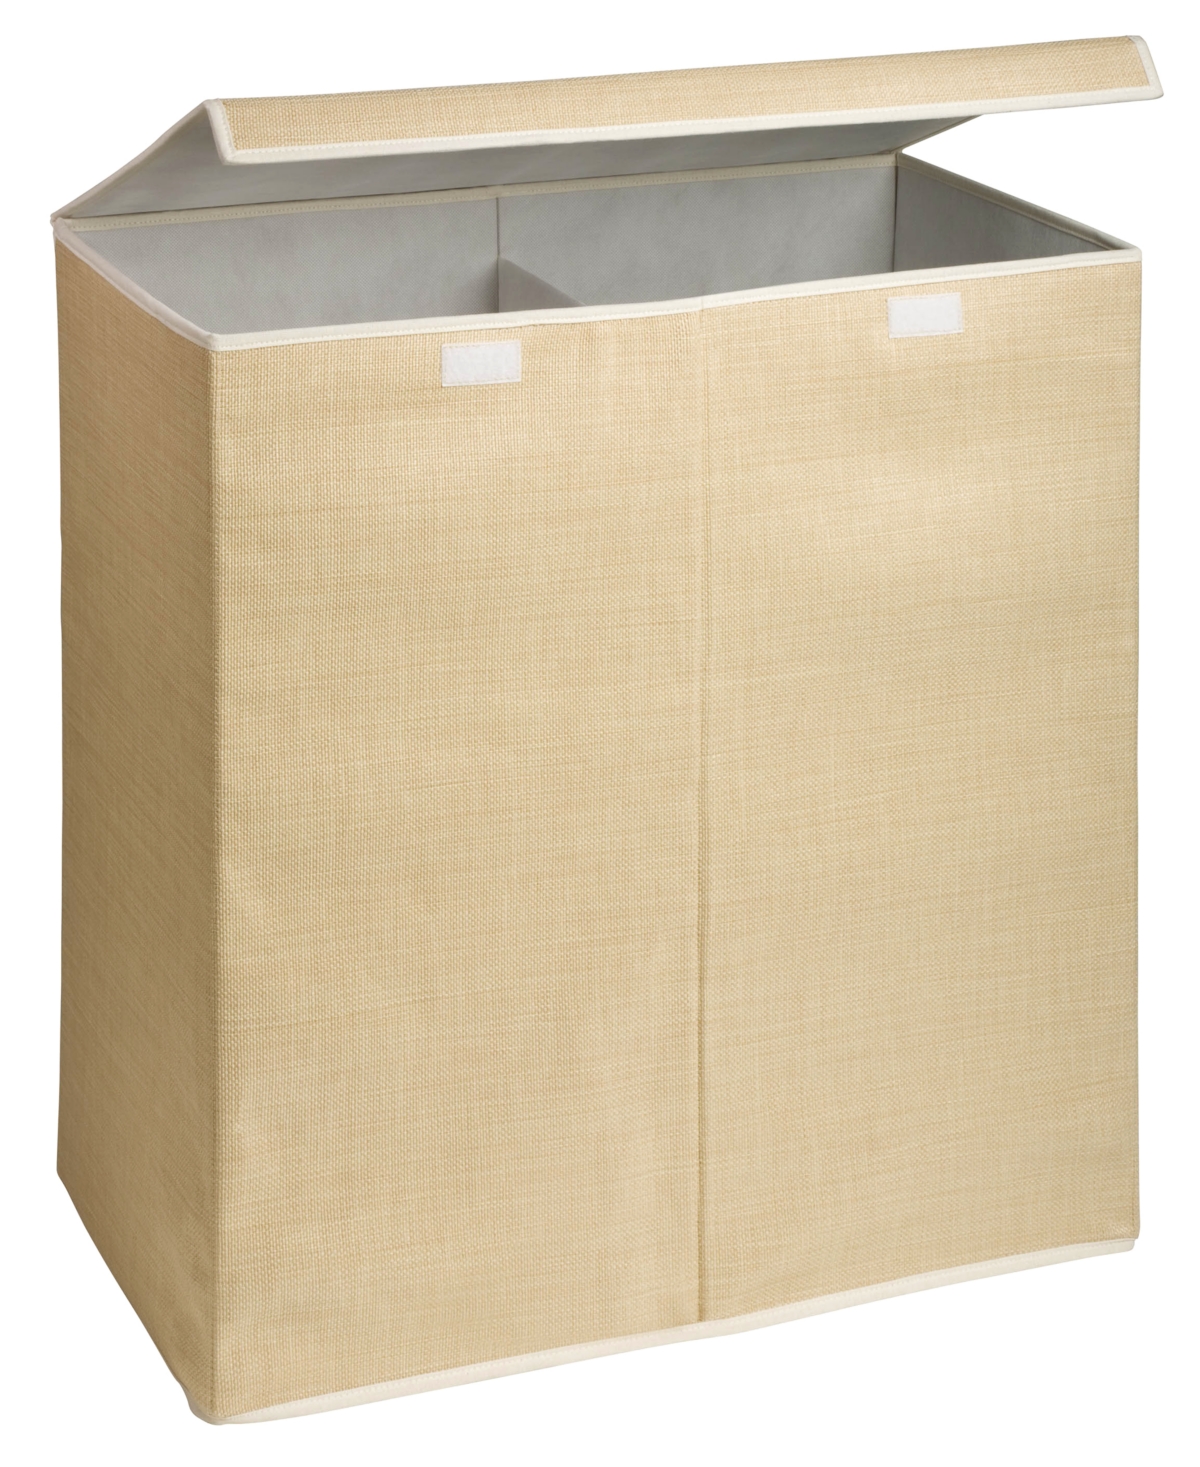 Hamper with Lid, Double Resin - Tan